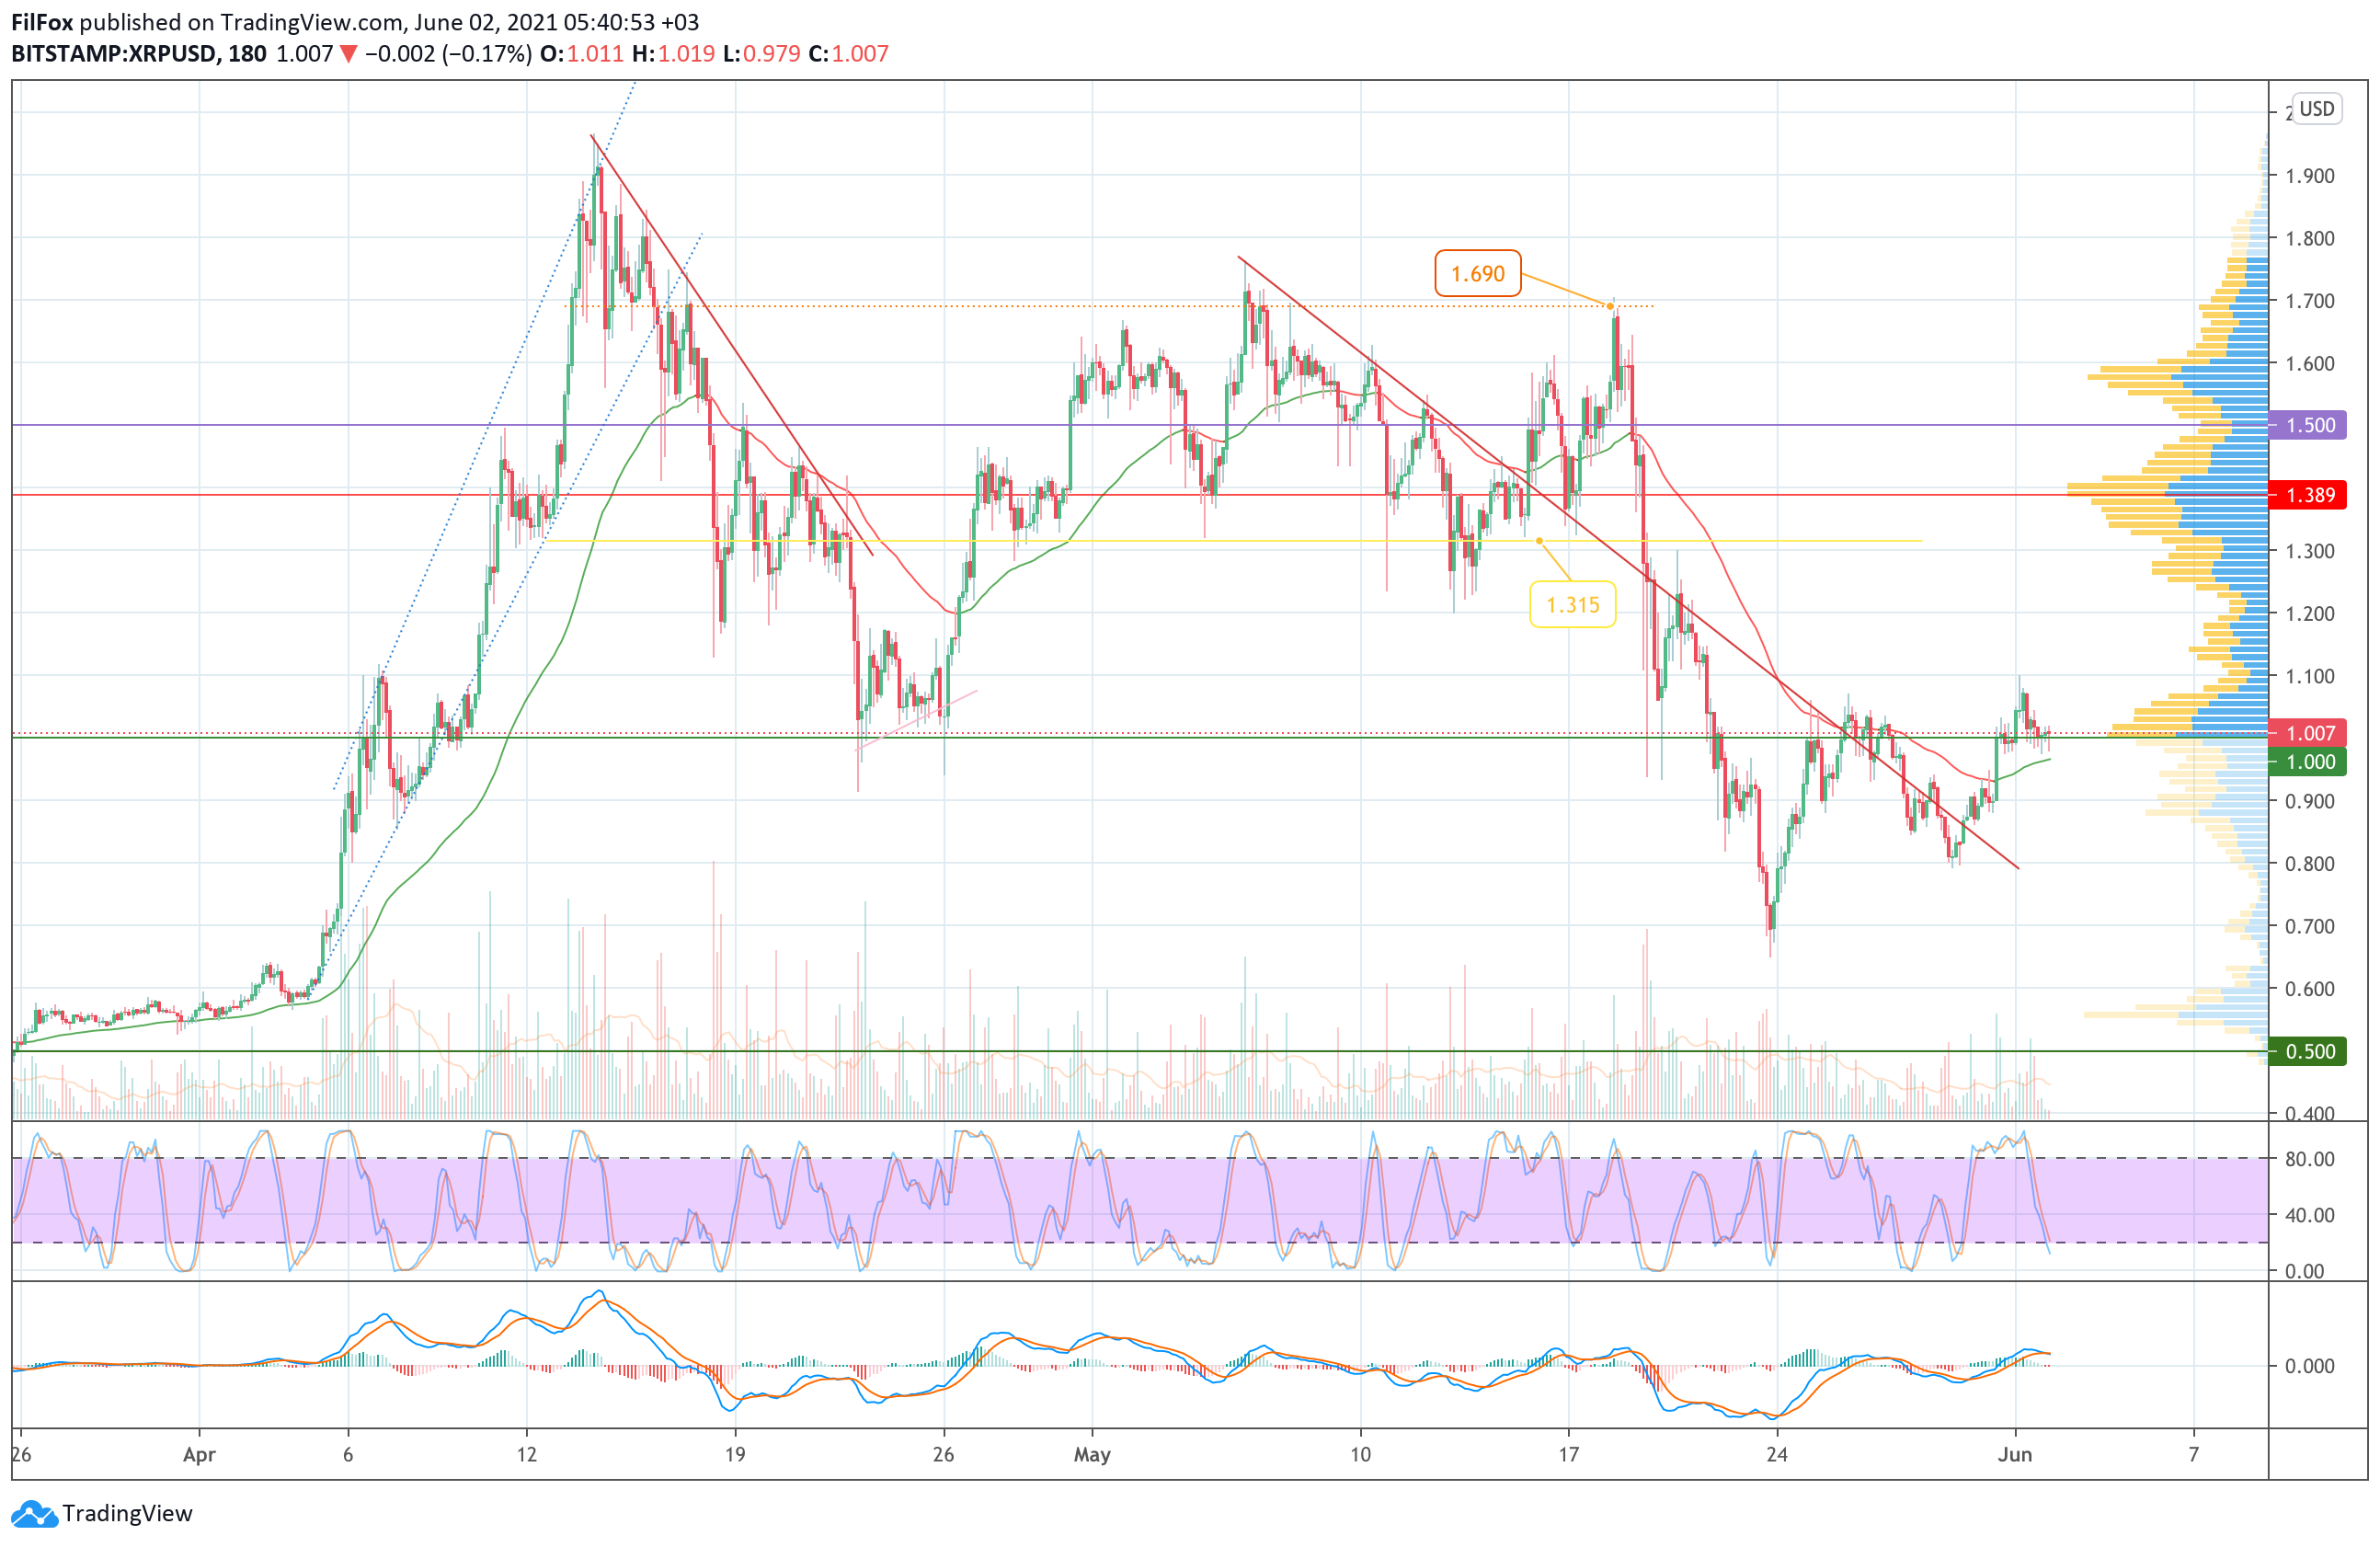 Analysis of prices for Bitcoin, Ethereum, XRP for 06/02/2021